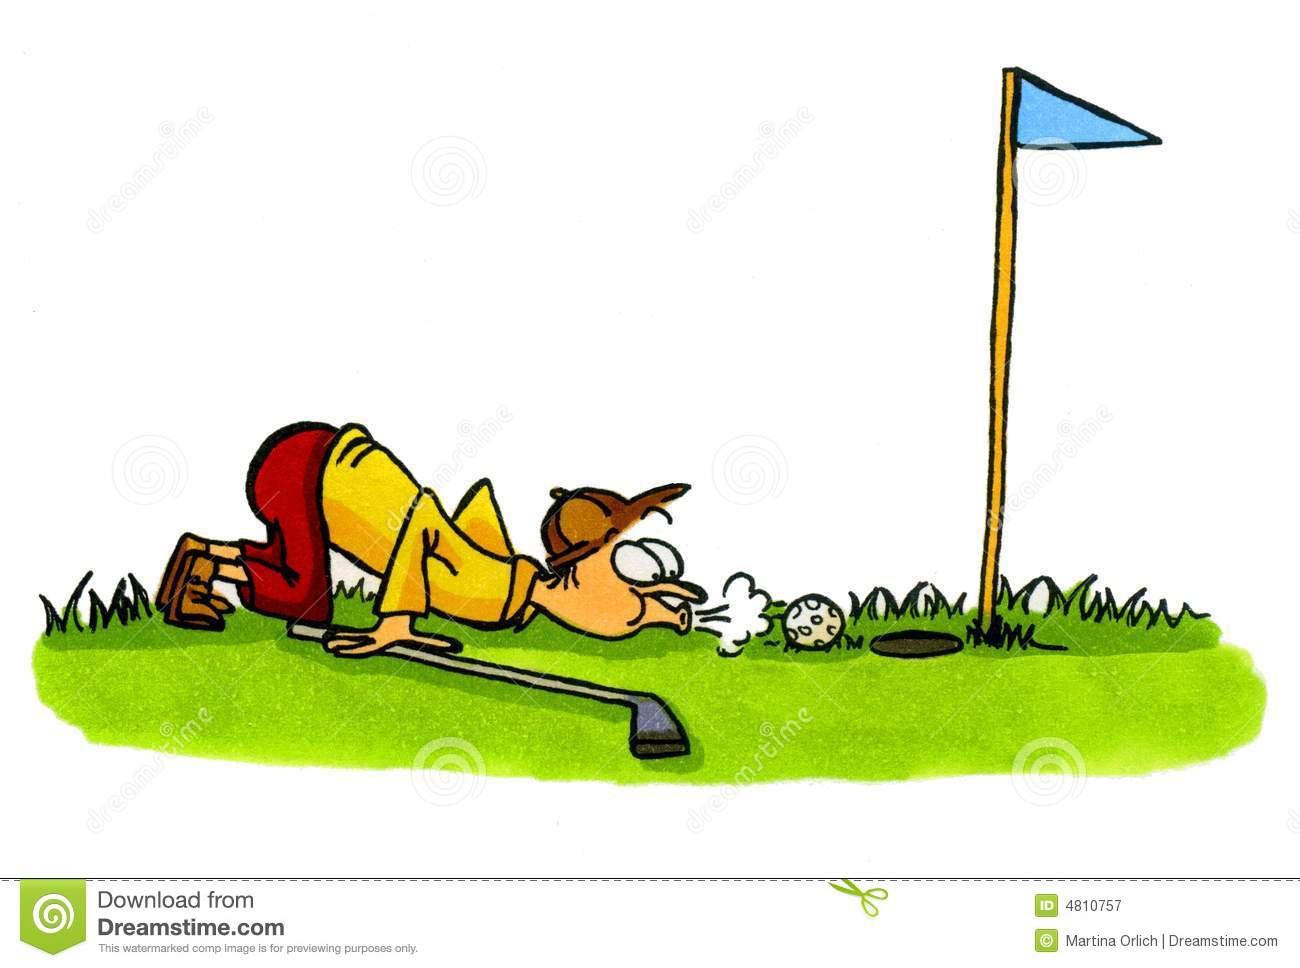 Golfer Golf Cartoons Series Number 4 Royalty Free Stock Photography